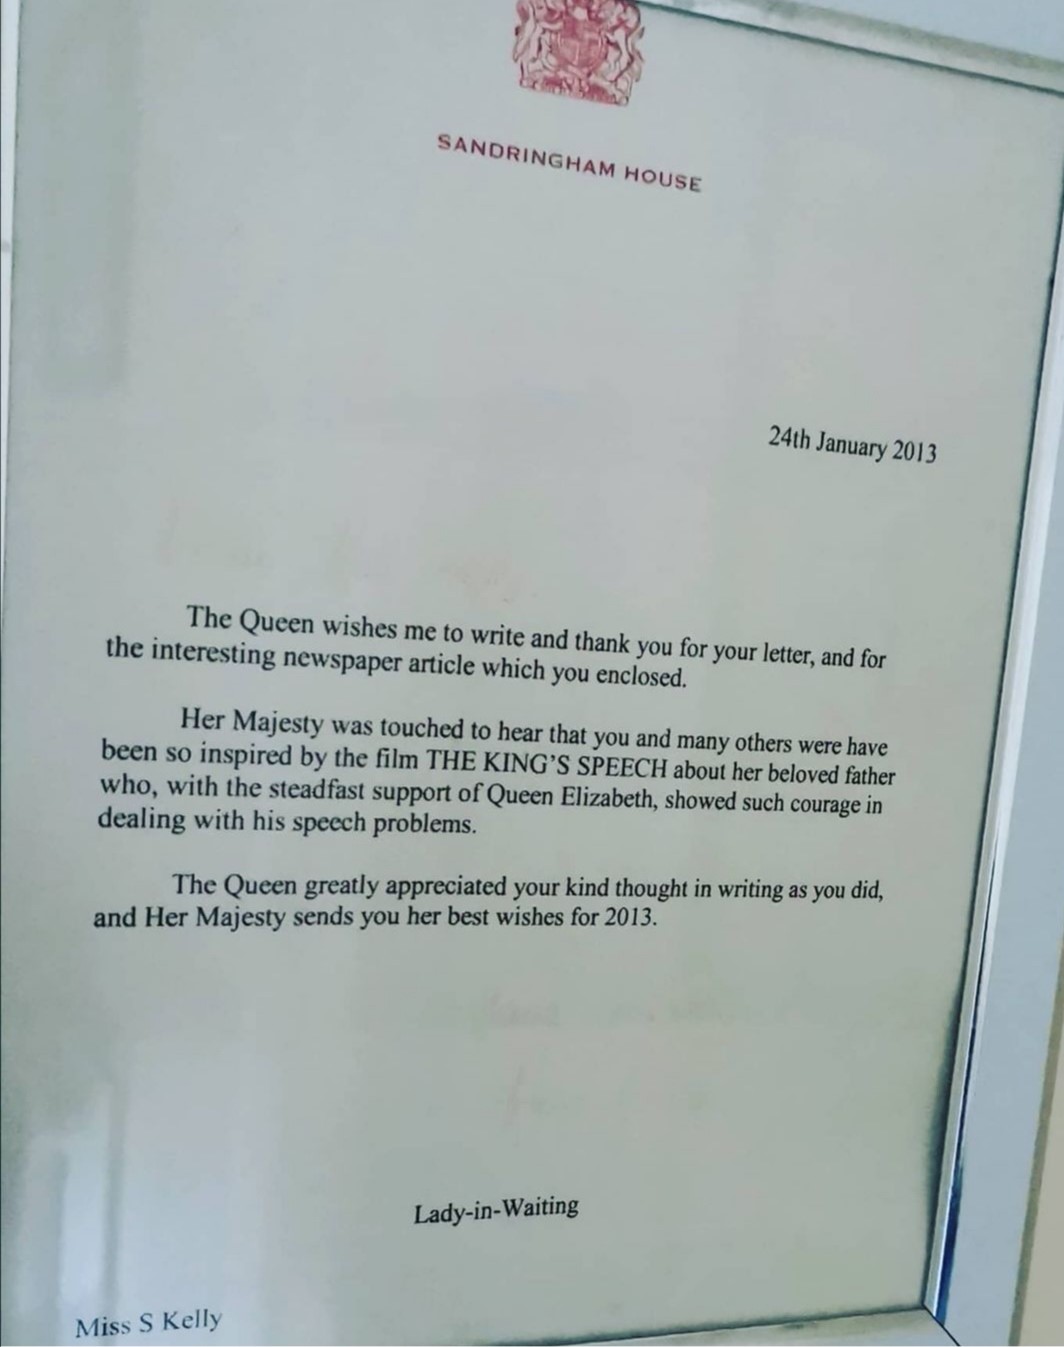 A letter from the Queen to the article's author Sandra